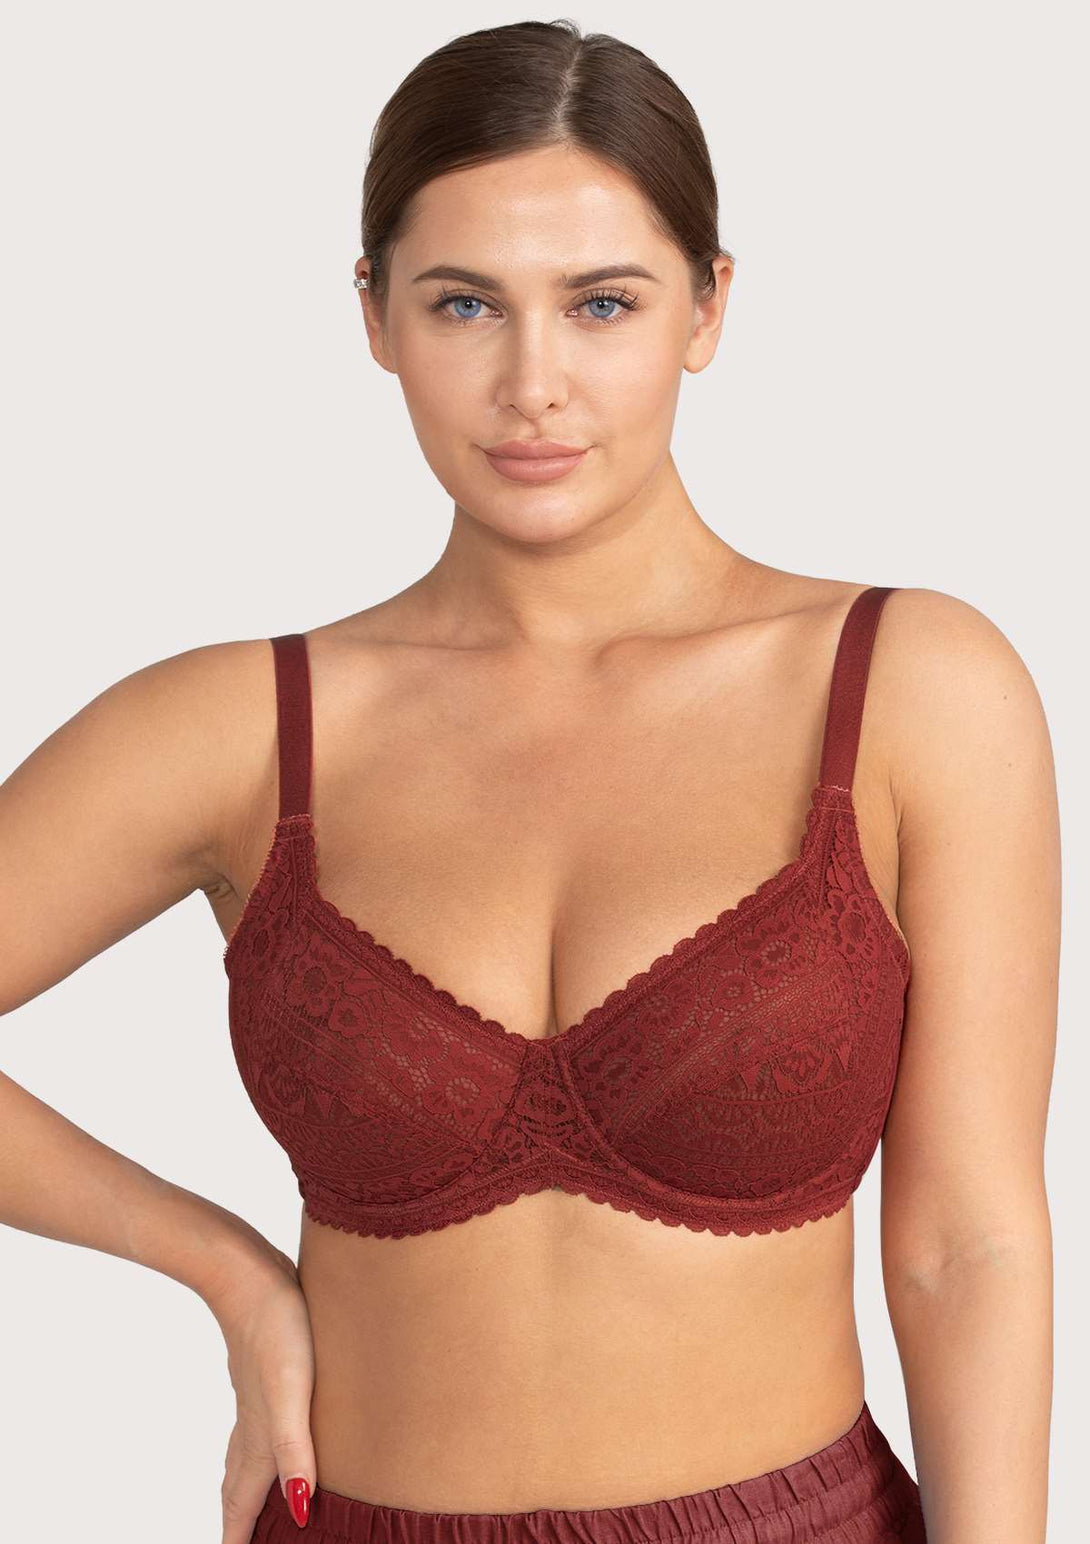 HSIA-BOGO HSIA Leaf Flower Lace Unlined Bra Red / 34 / C